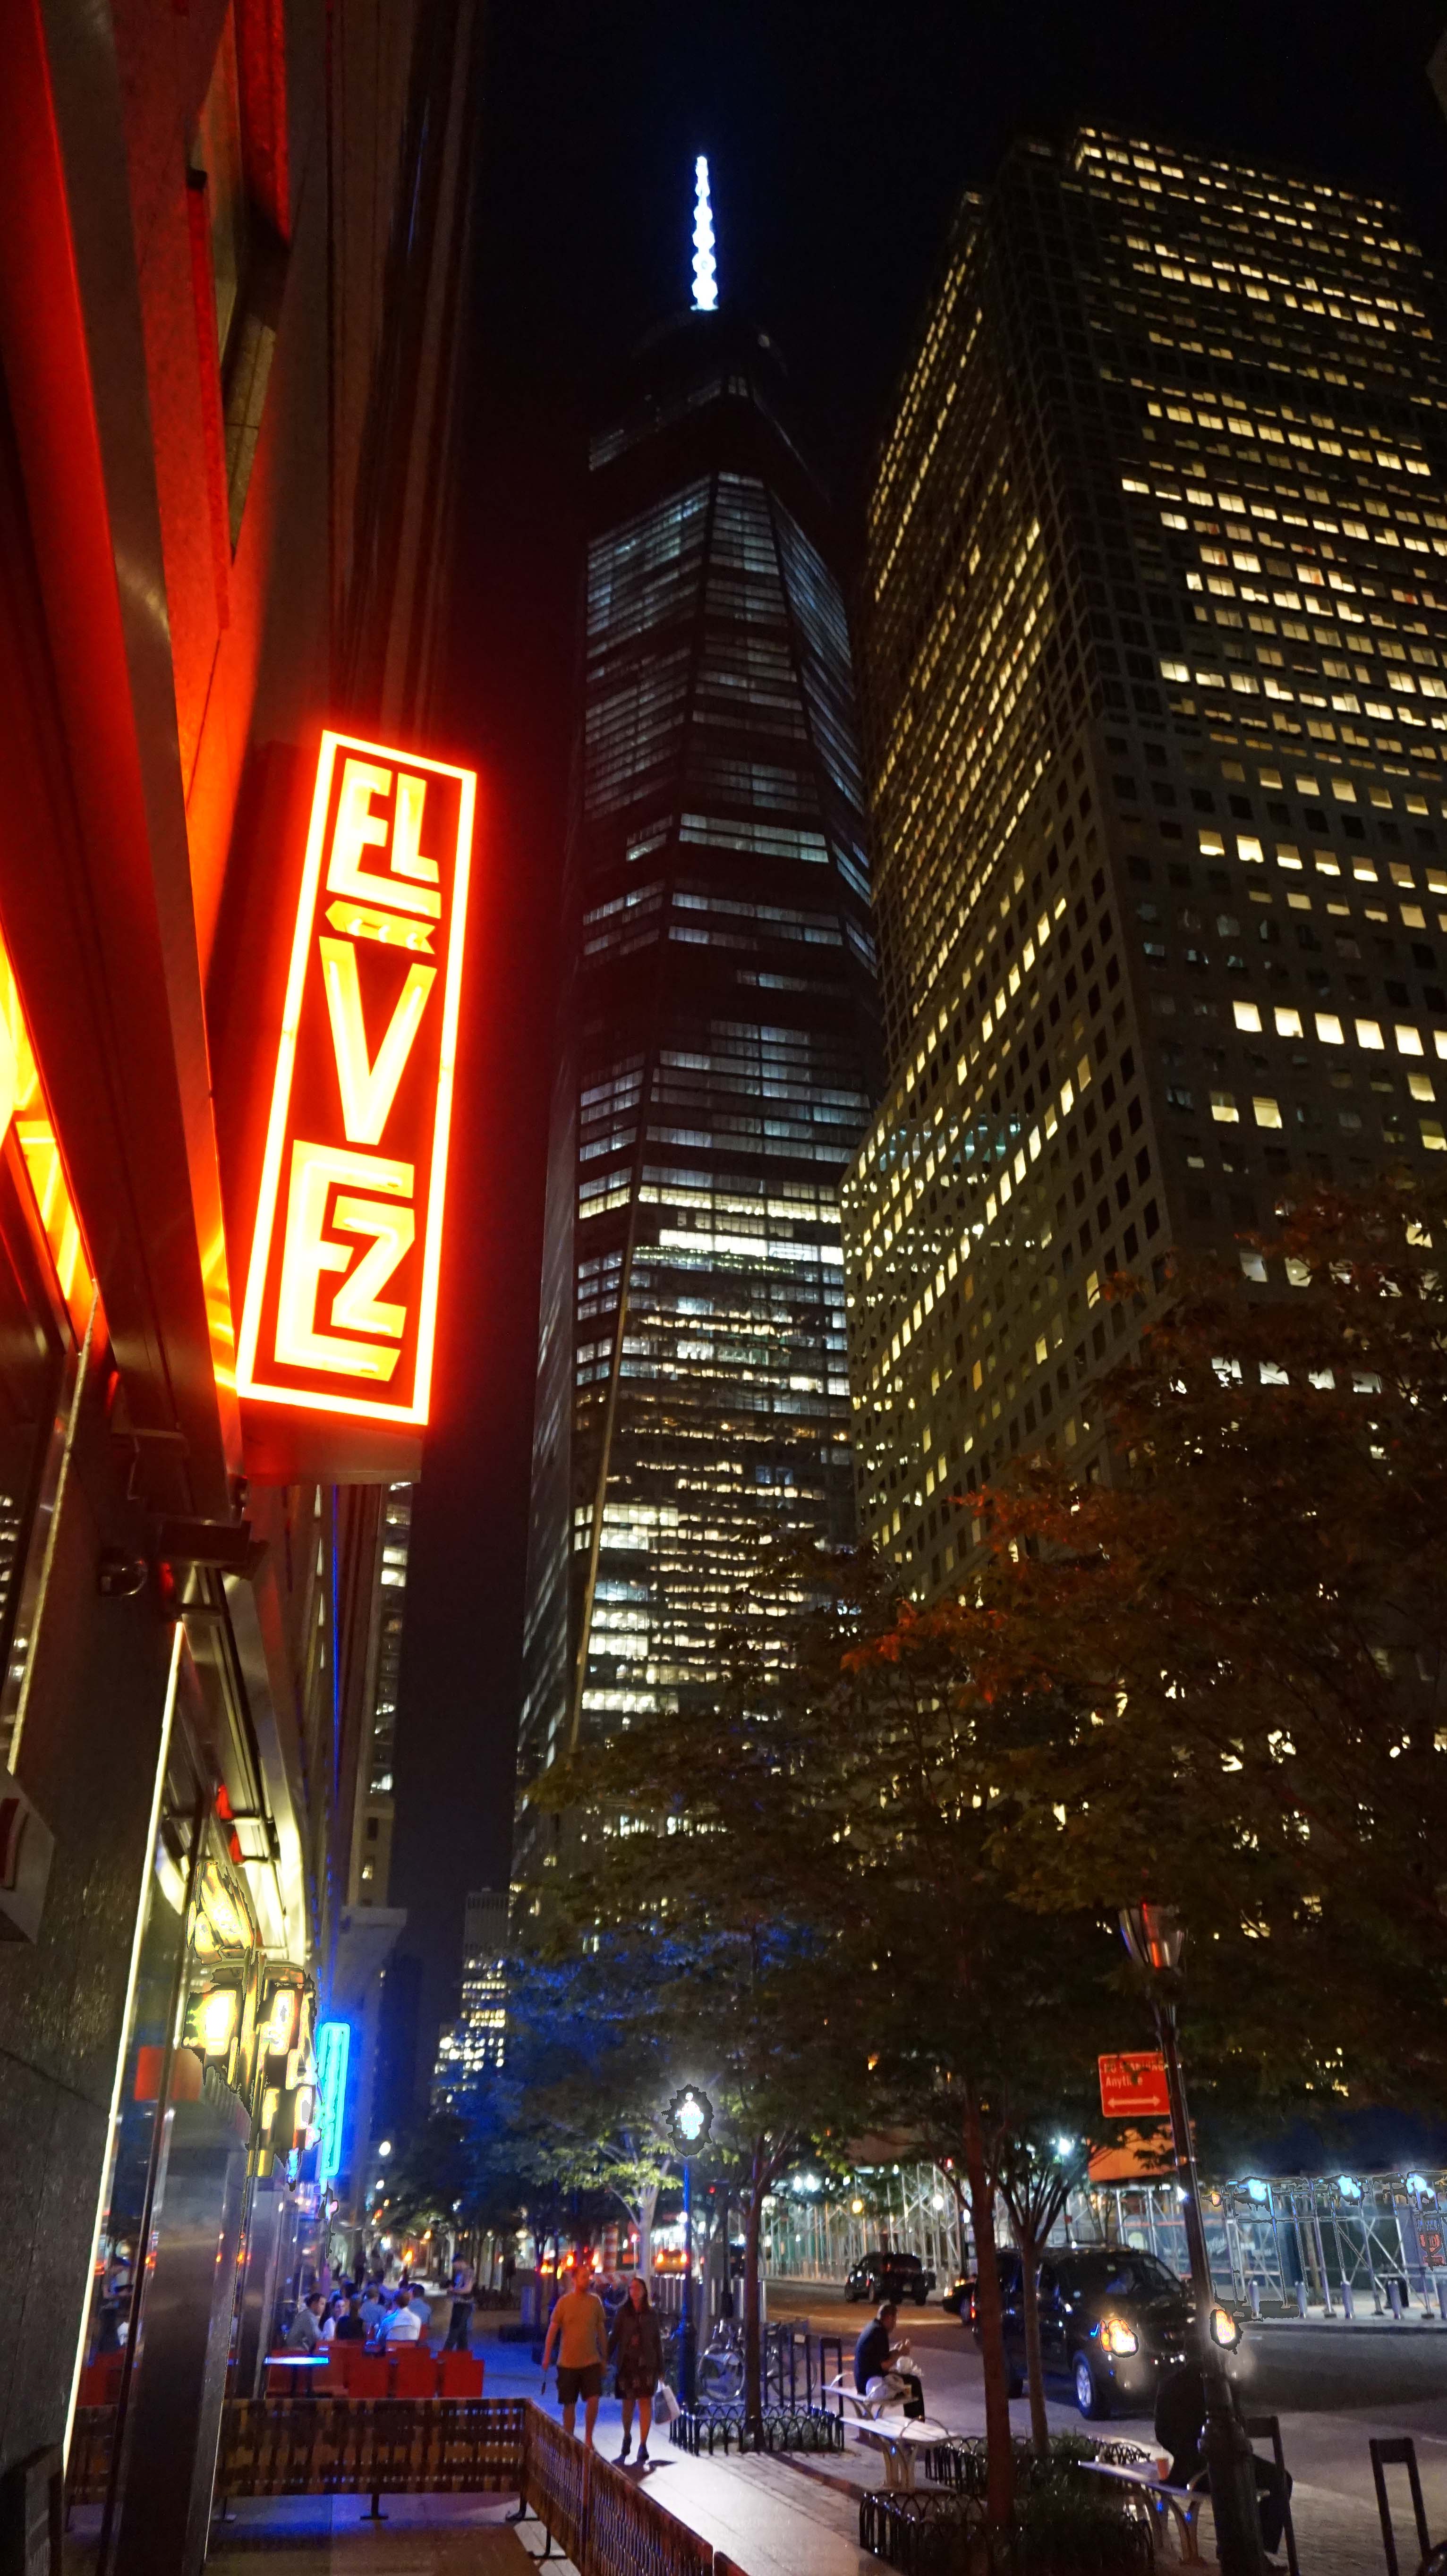 El Vez sign with Freedom Tower low